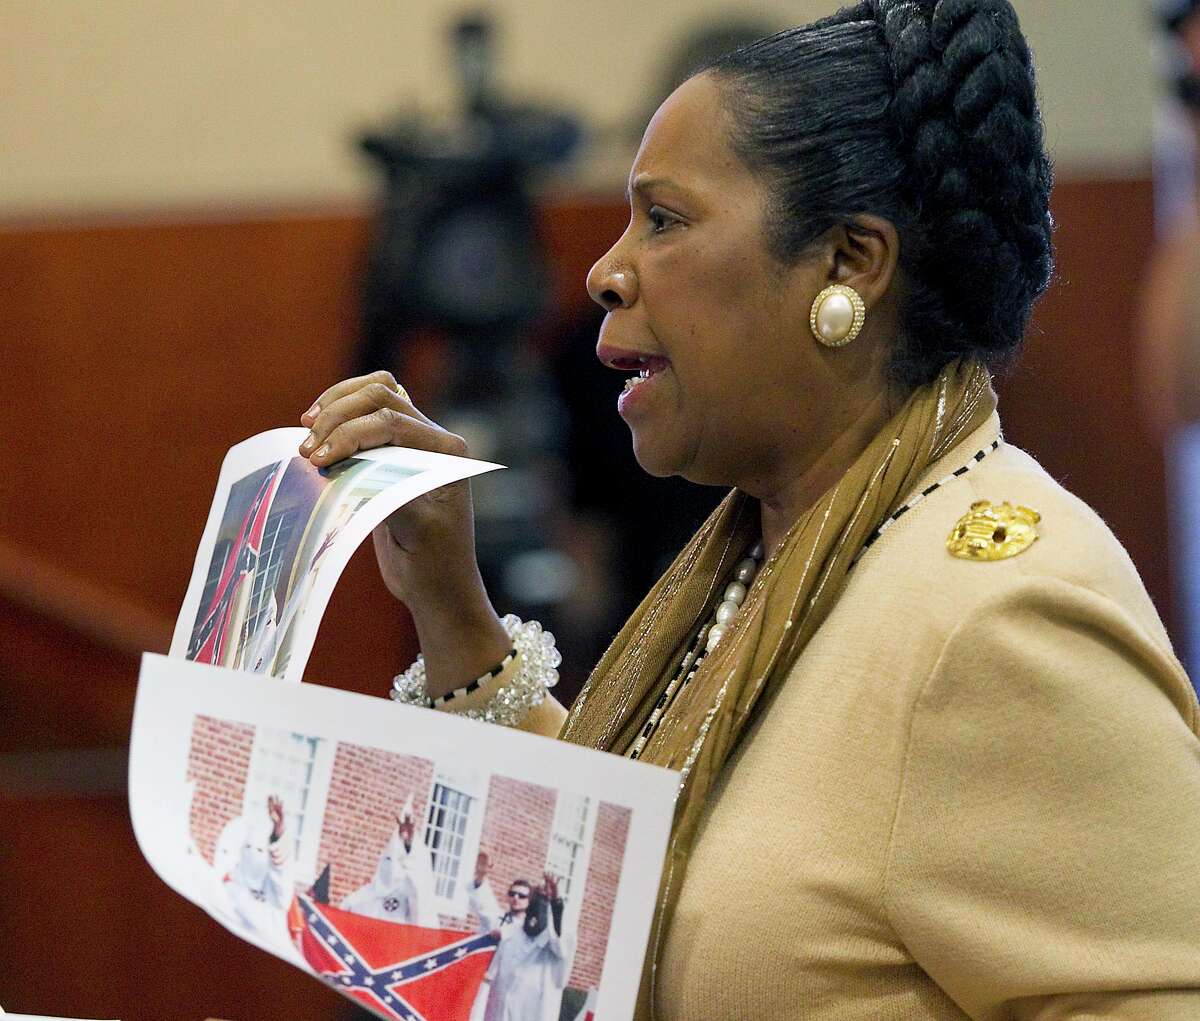 Rep. Sheila Jackson Lee holds photographs on Nov. 10, 2011, in Austin. Texas drivers won't be able to put Confederate license plates on their vehicles after a state board unanimously rejected the proposed design.